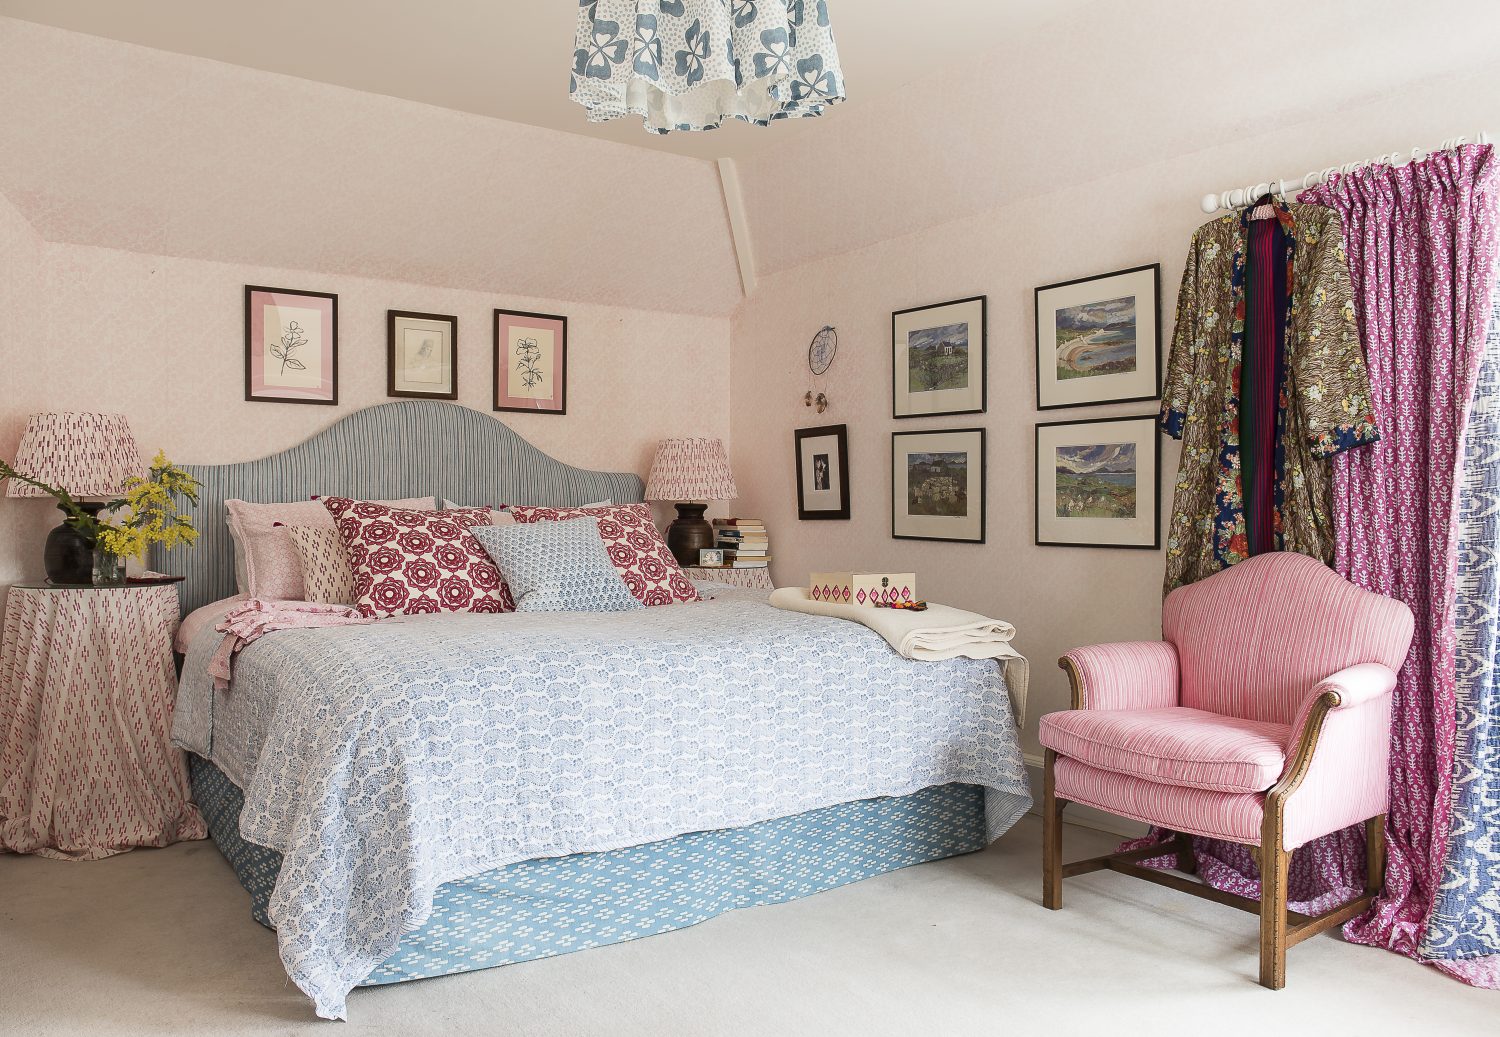 In the master bedroom, all the fabrics – quilt, headboard, lampshades, valance, bedding, cushions, chair – and the wallpaper are all from Molly Mahon